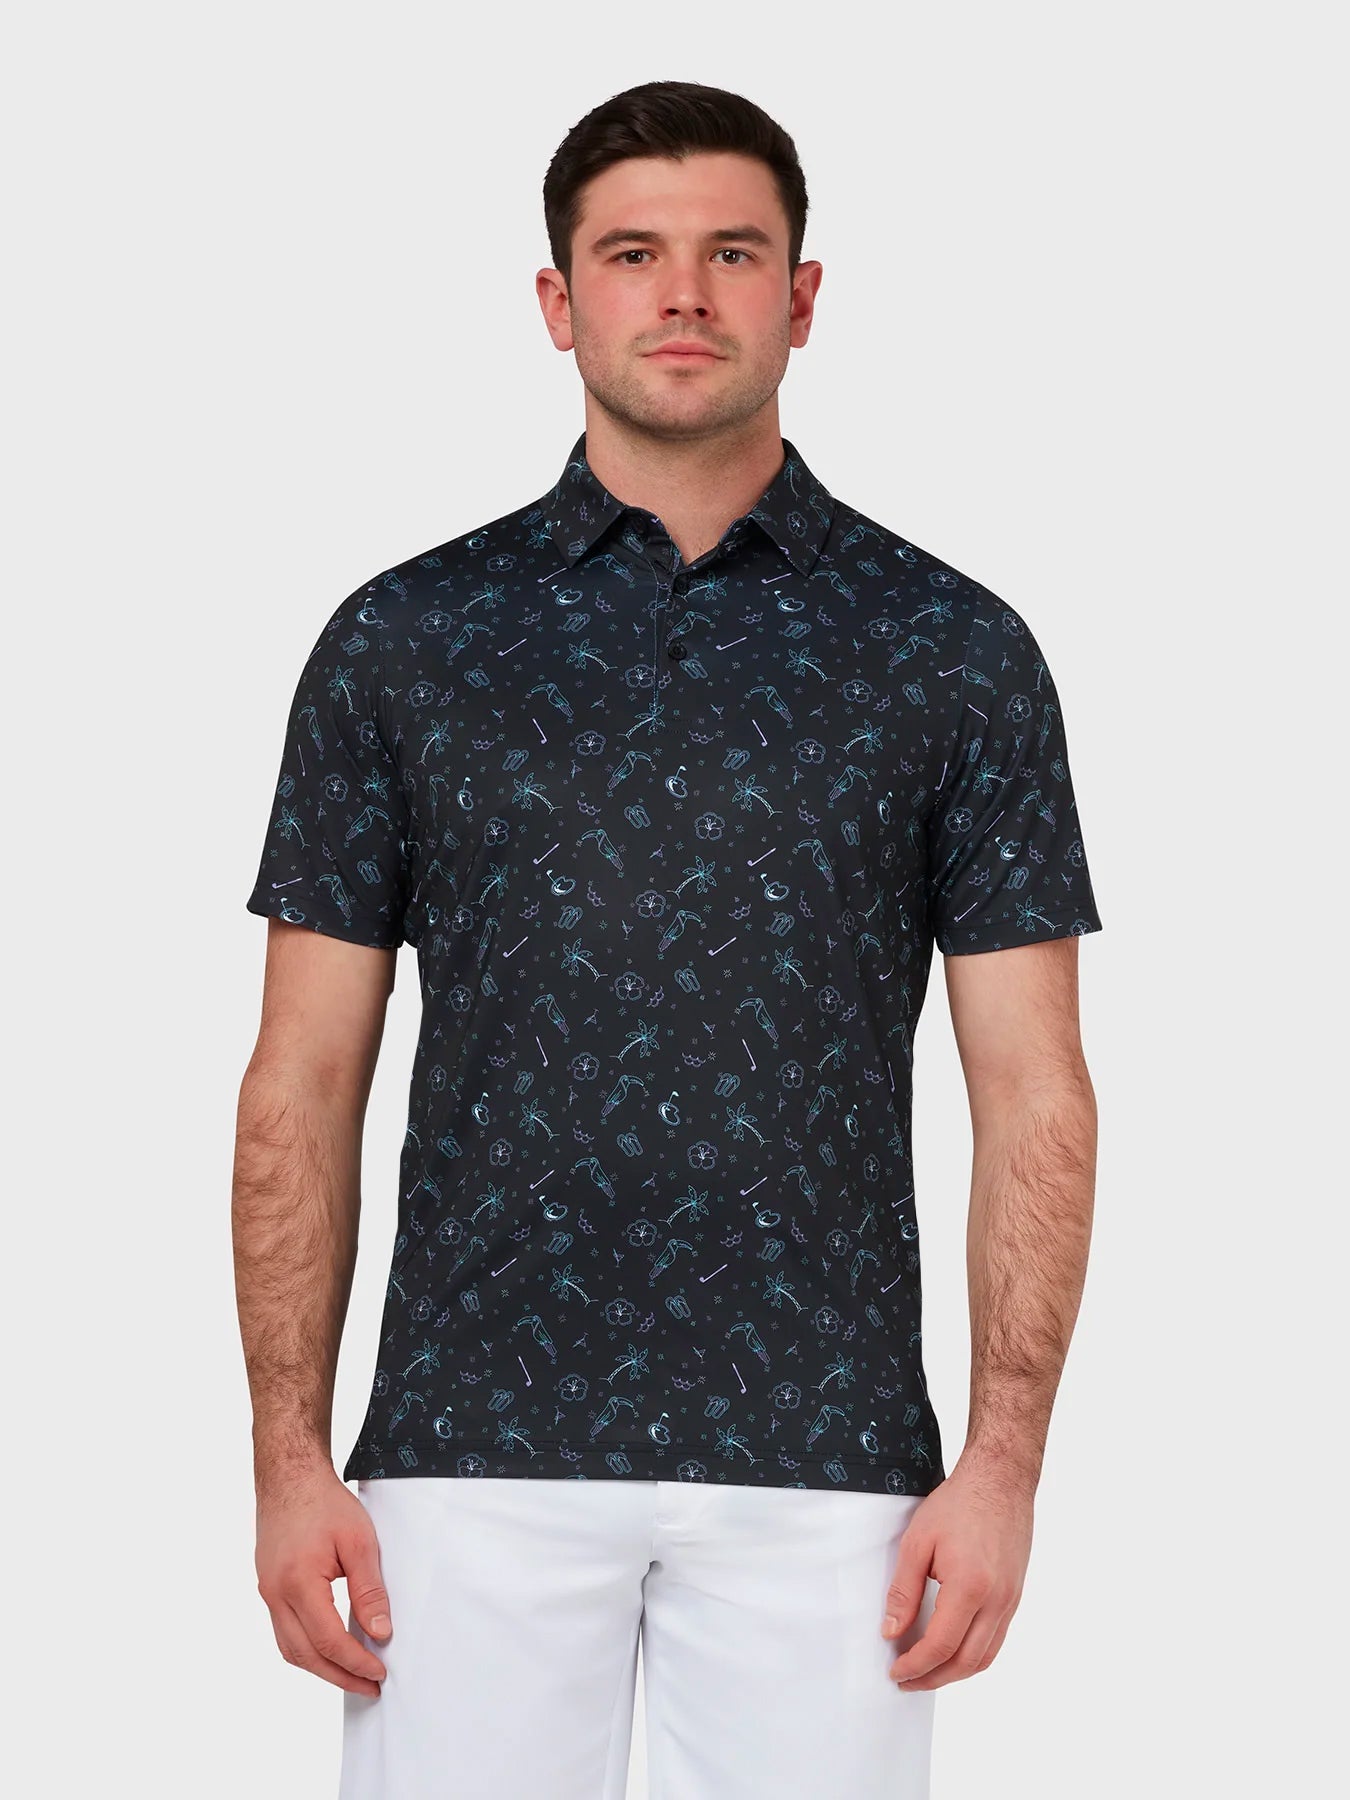 View All Over Golf Tucan Print Polo In Caviar Caviar XS information